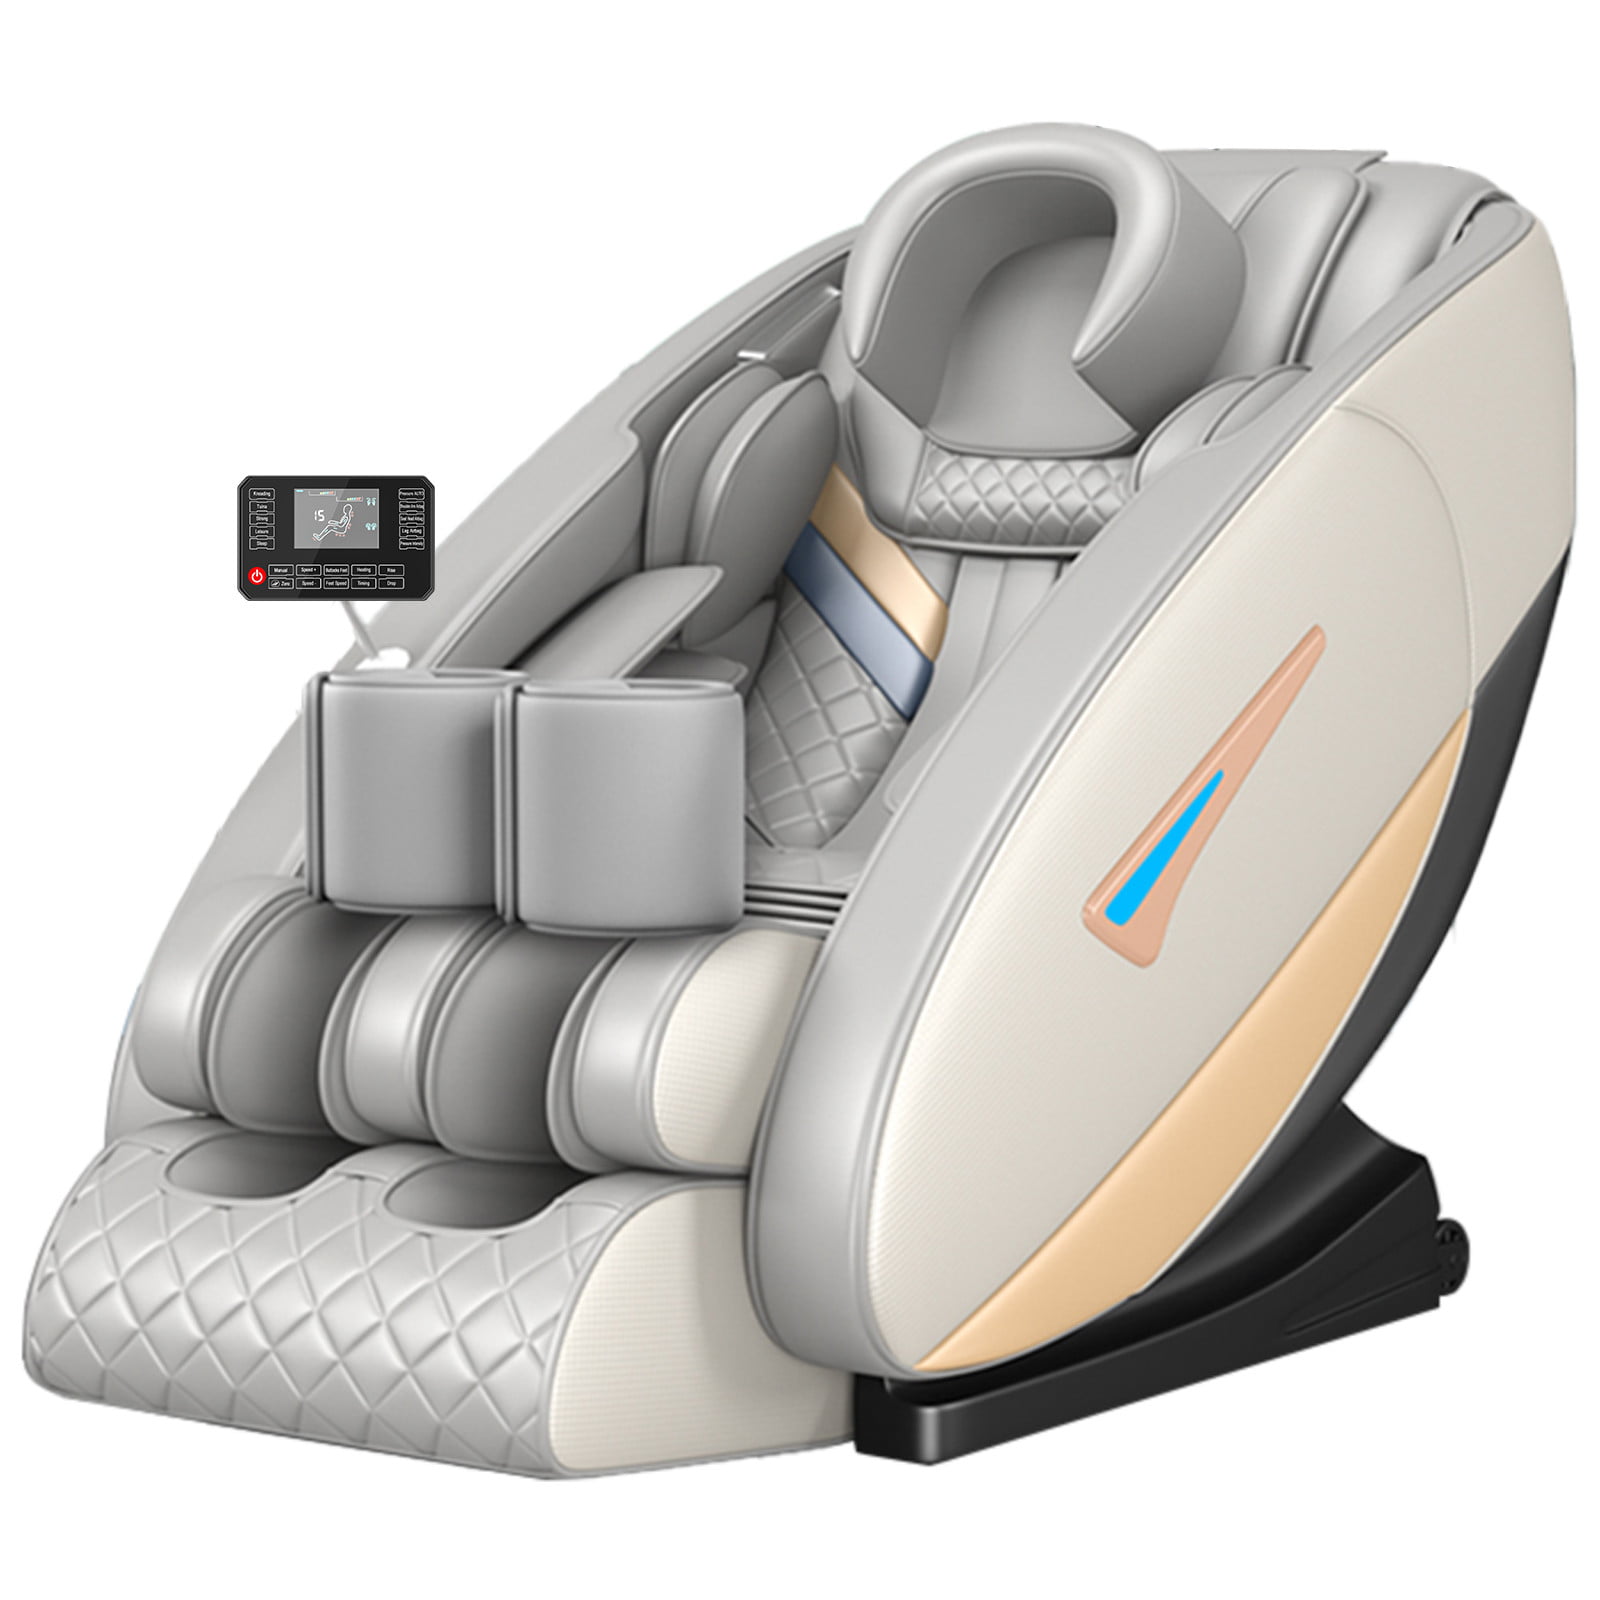 Details about   Heat-Therapy Warm Massage Rollers Full Body Electric Shiatsu Massage Chair 